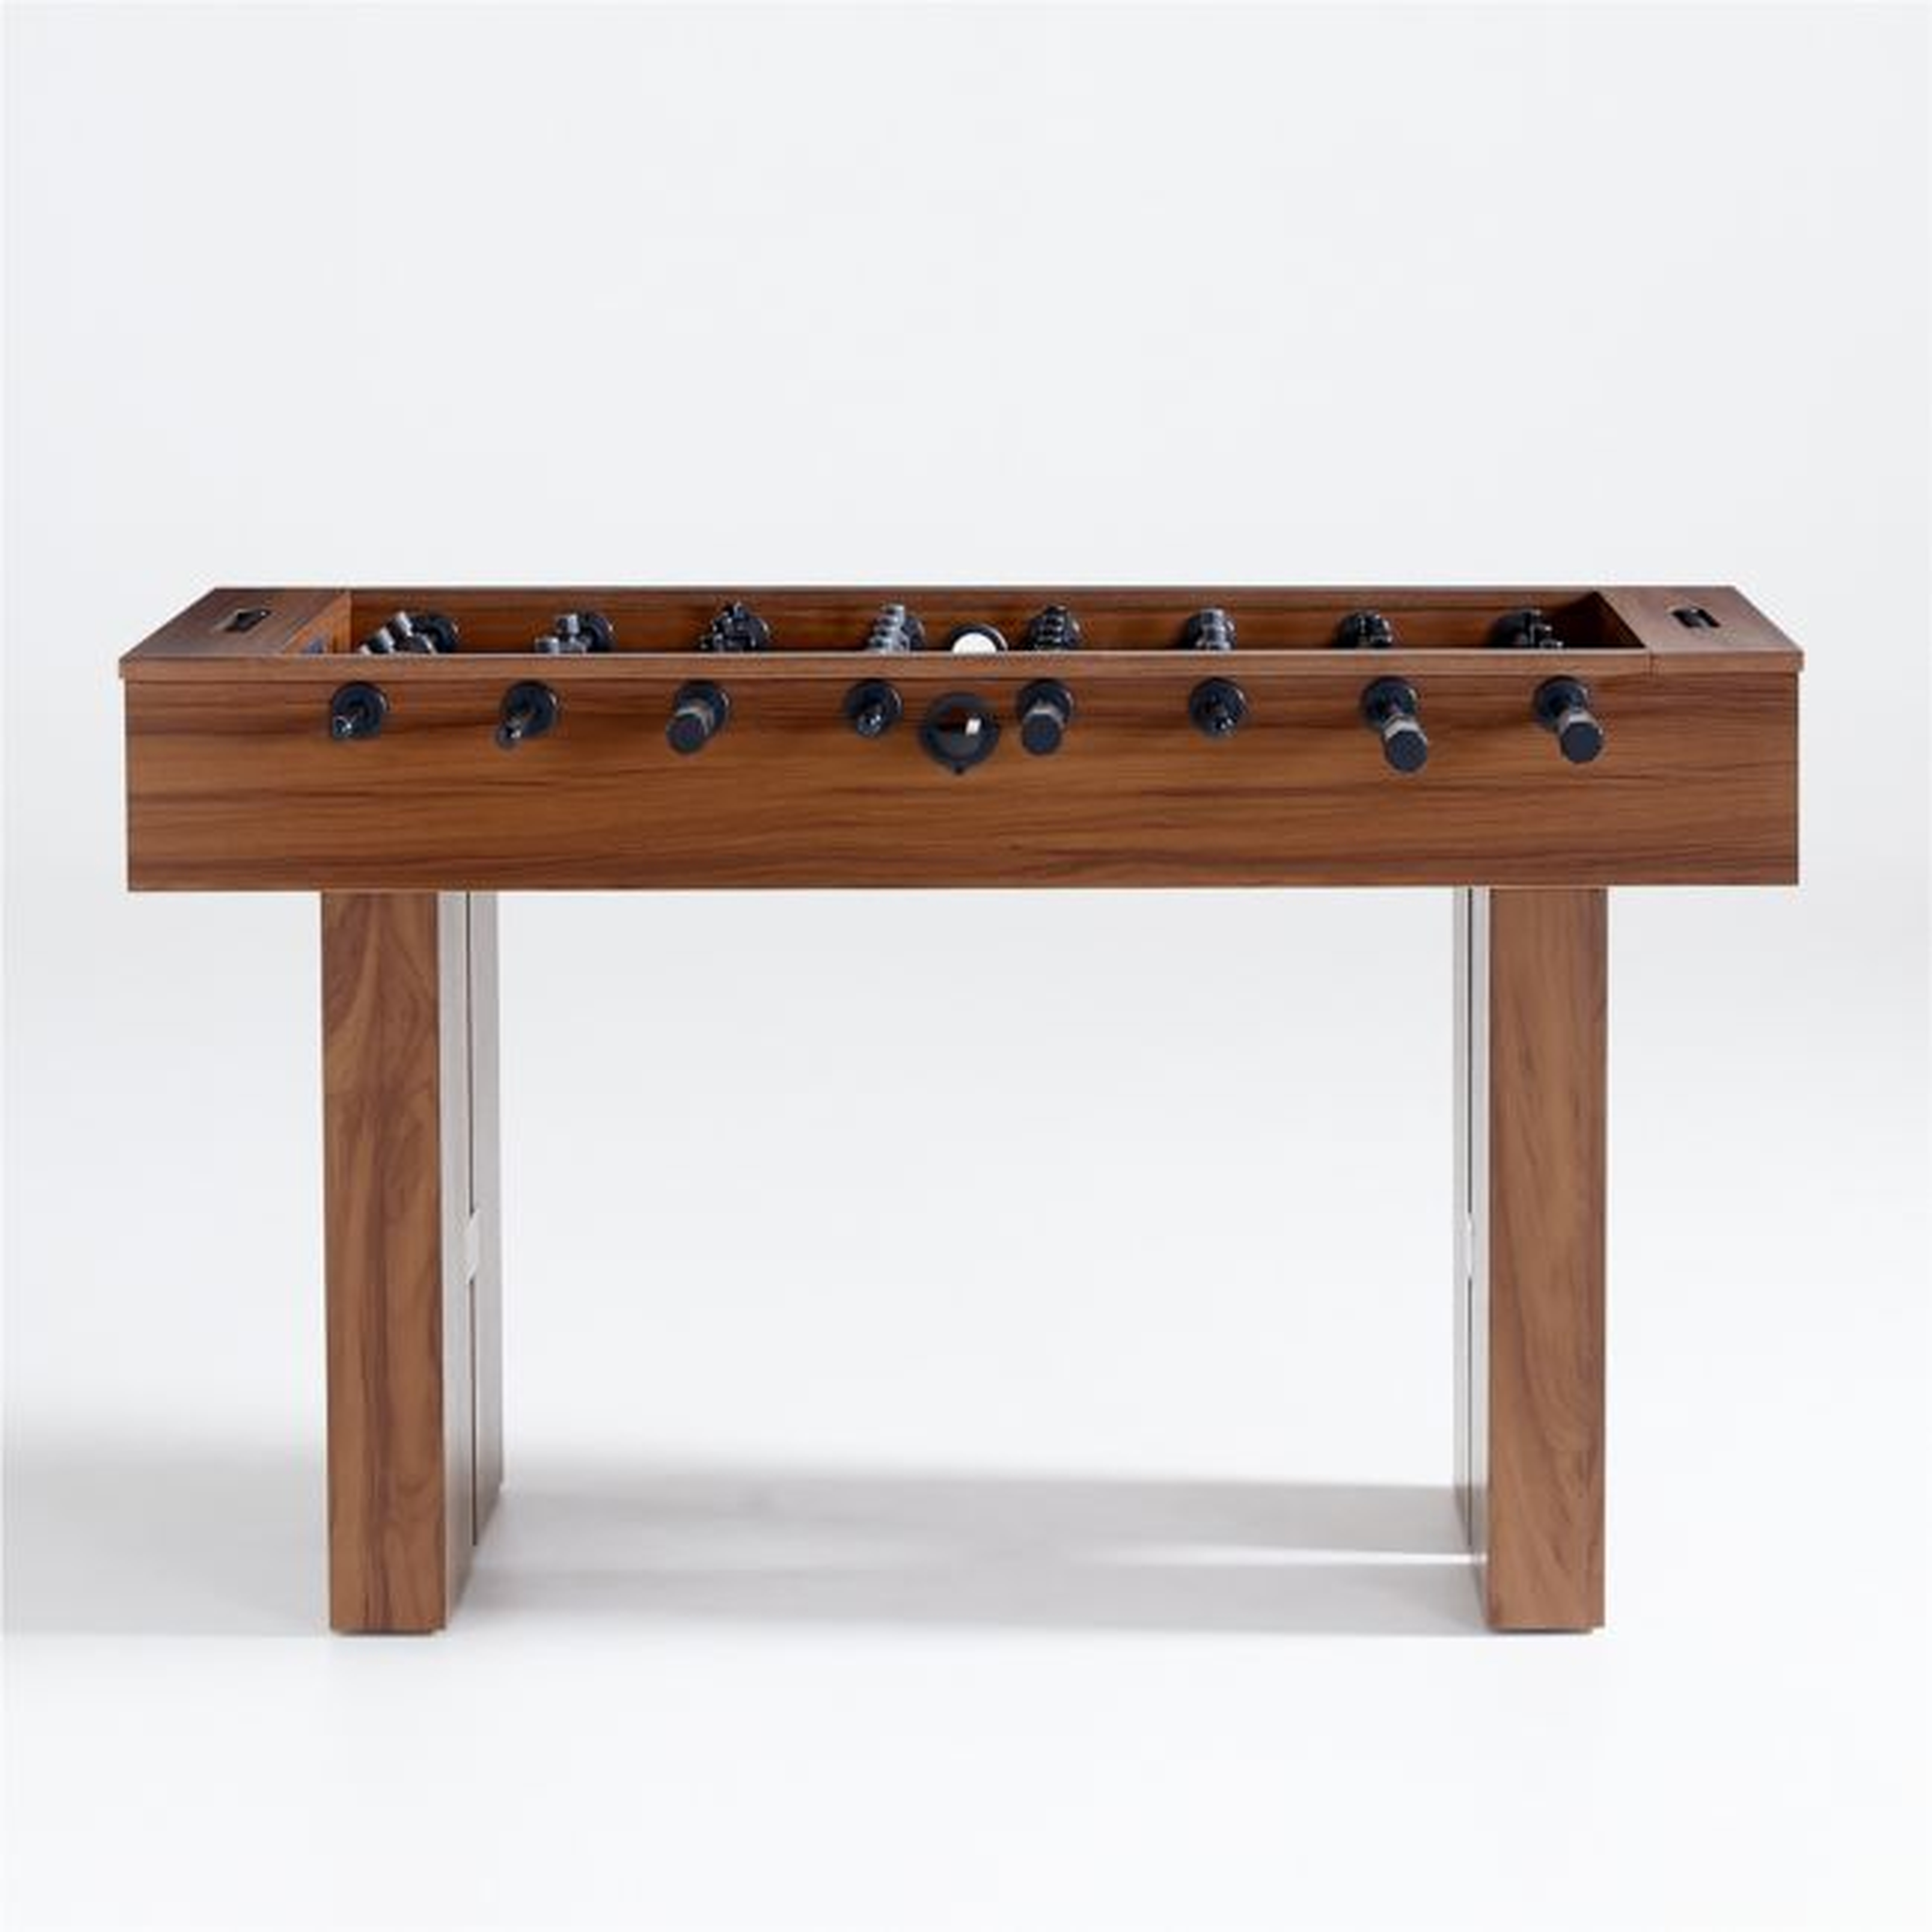 Foosball Table - Crate and Barrel